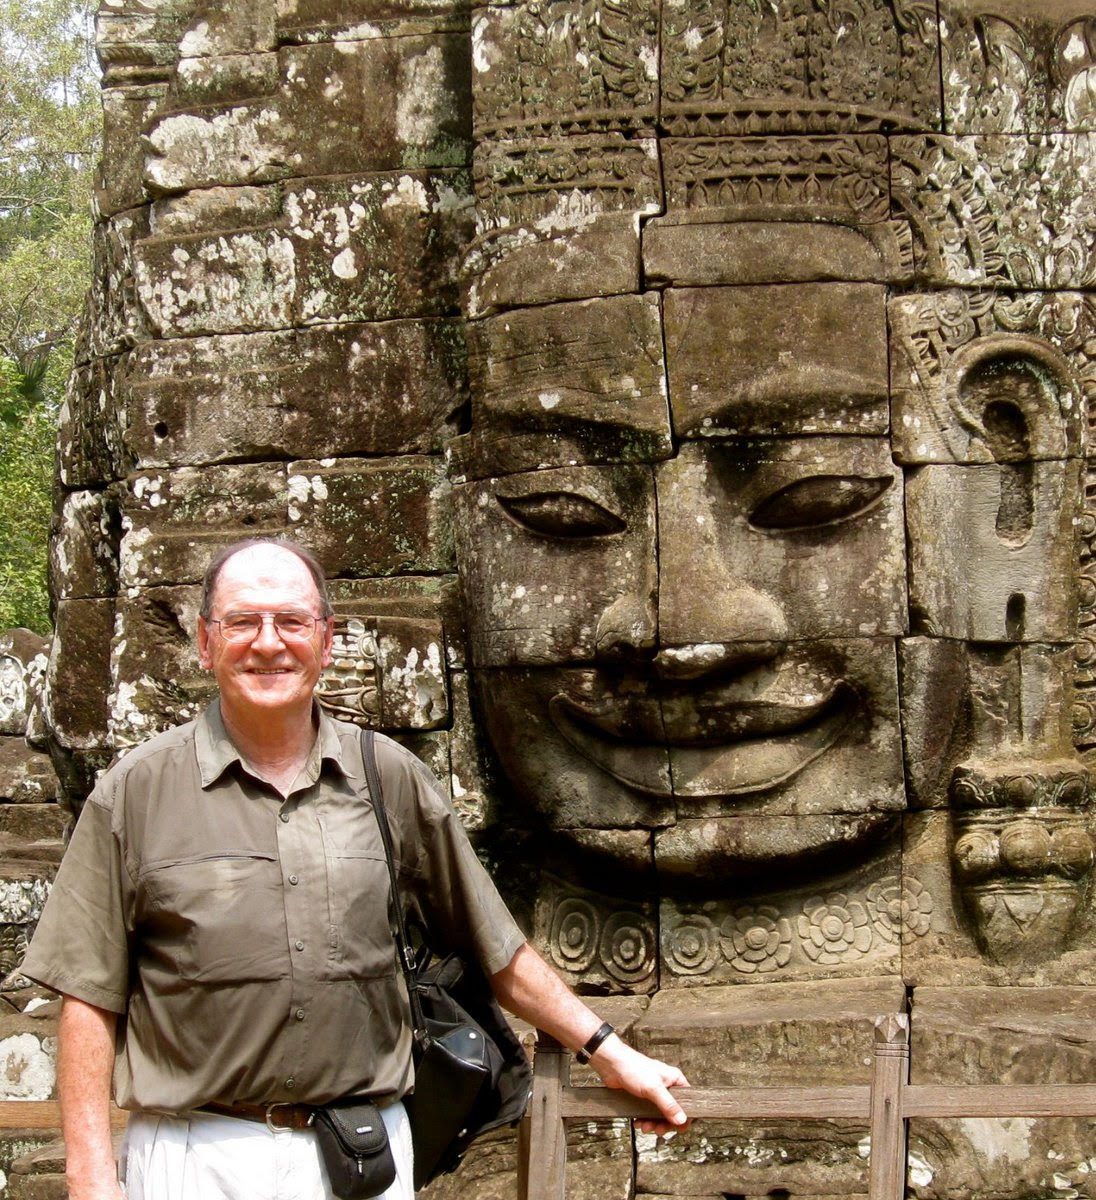 Hermann Kulke in 2012 at the Bayon temple at Angkor, built in late 12th century.